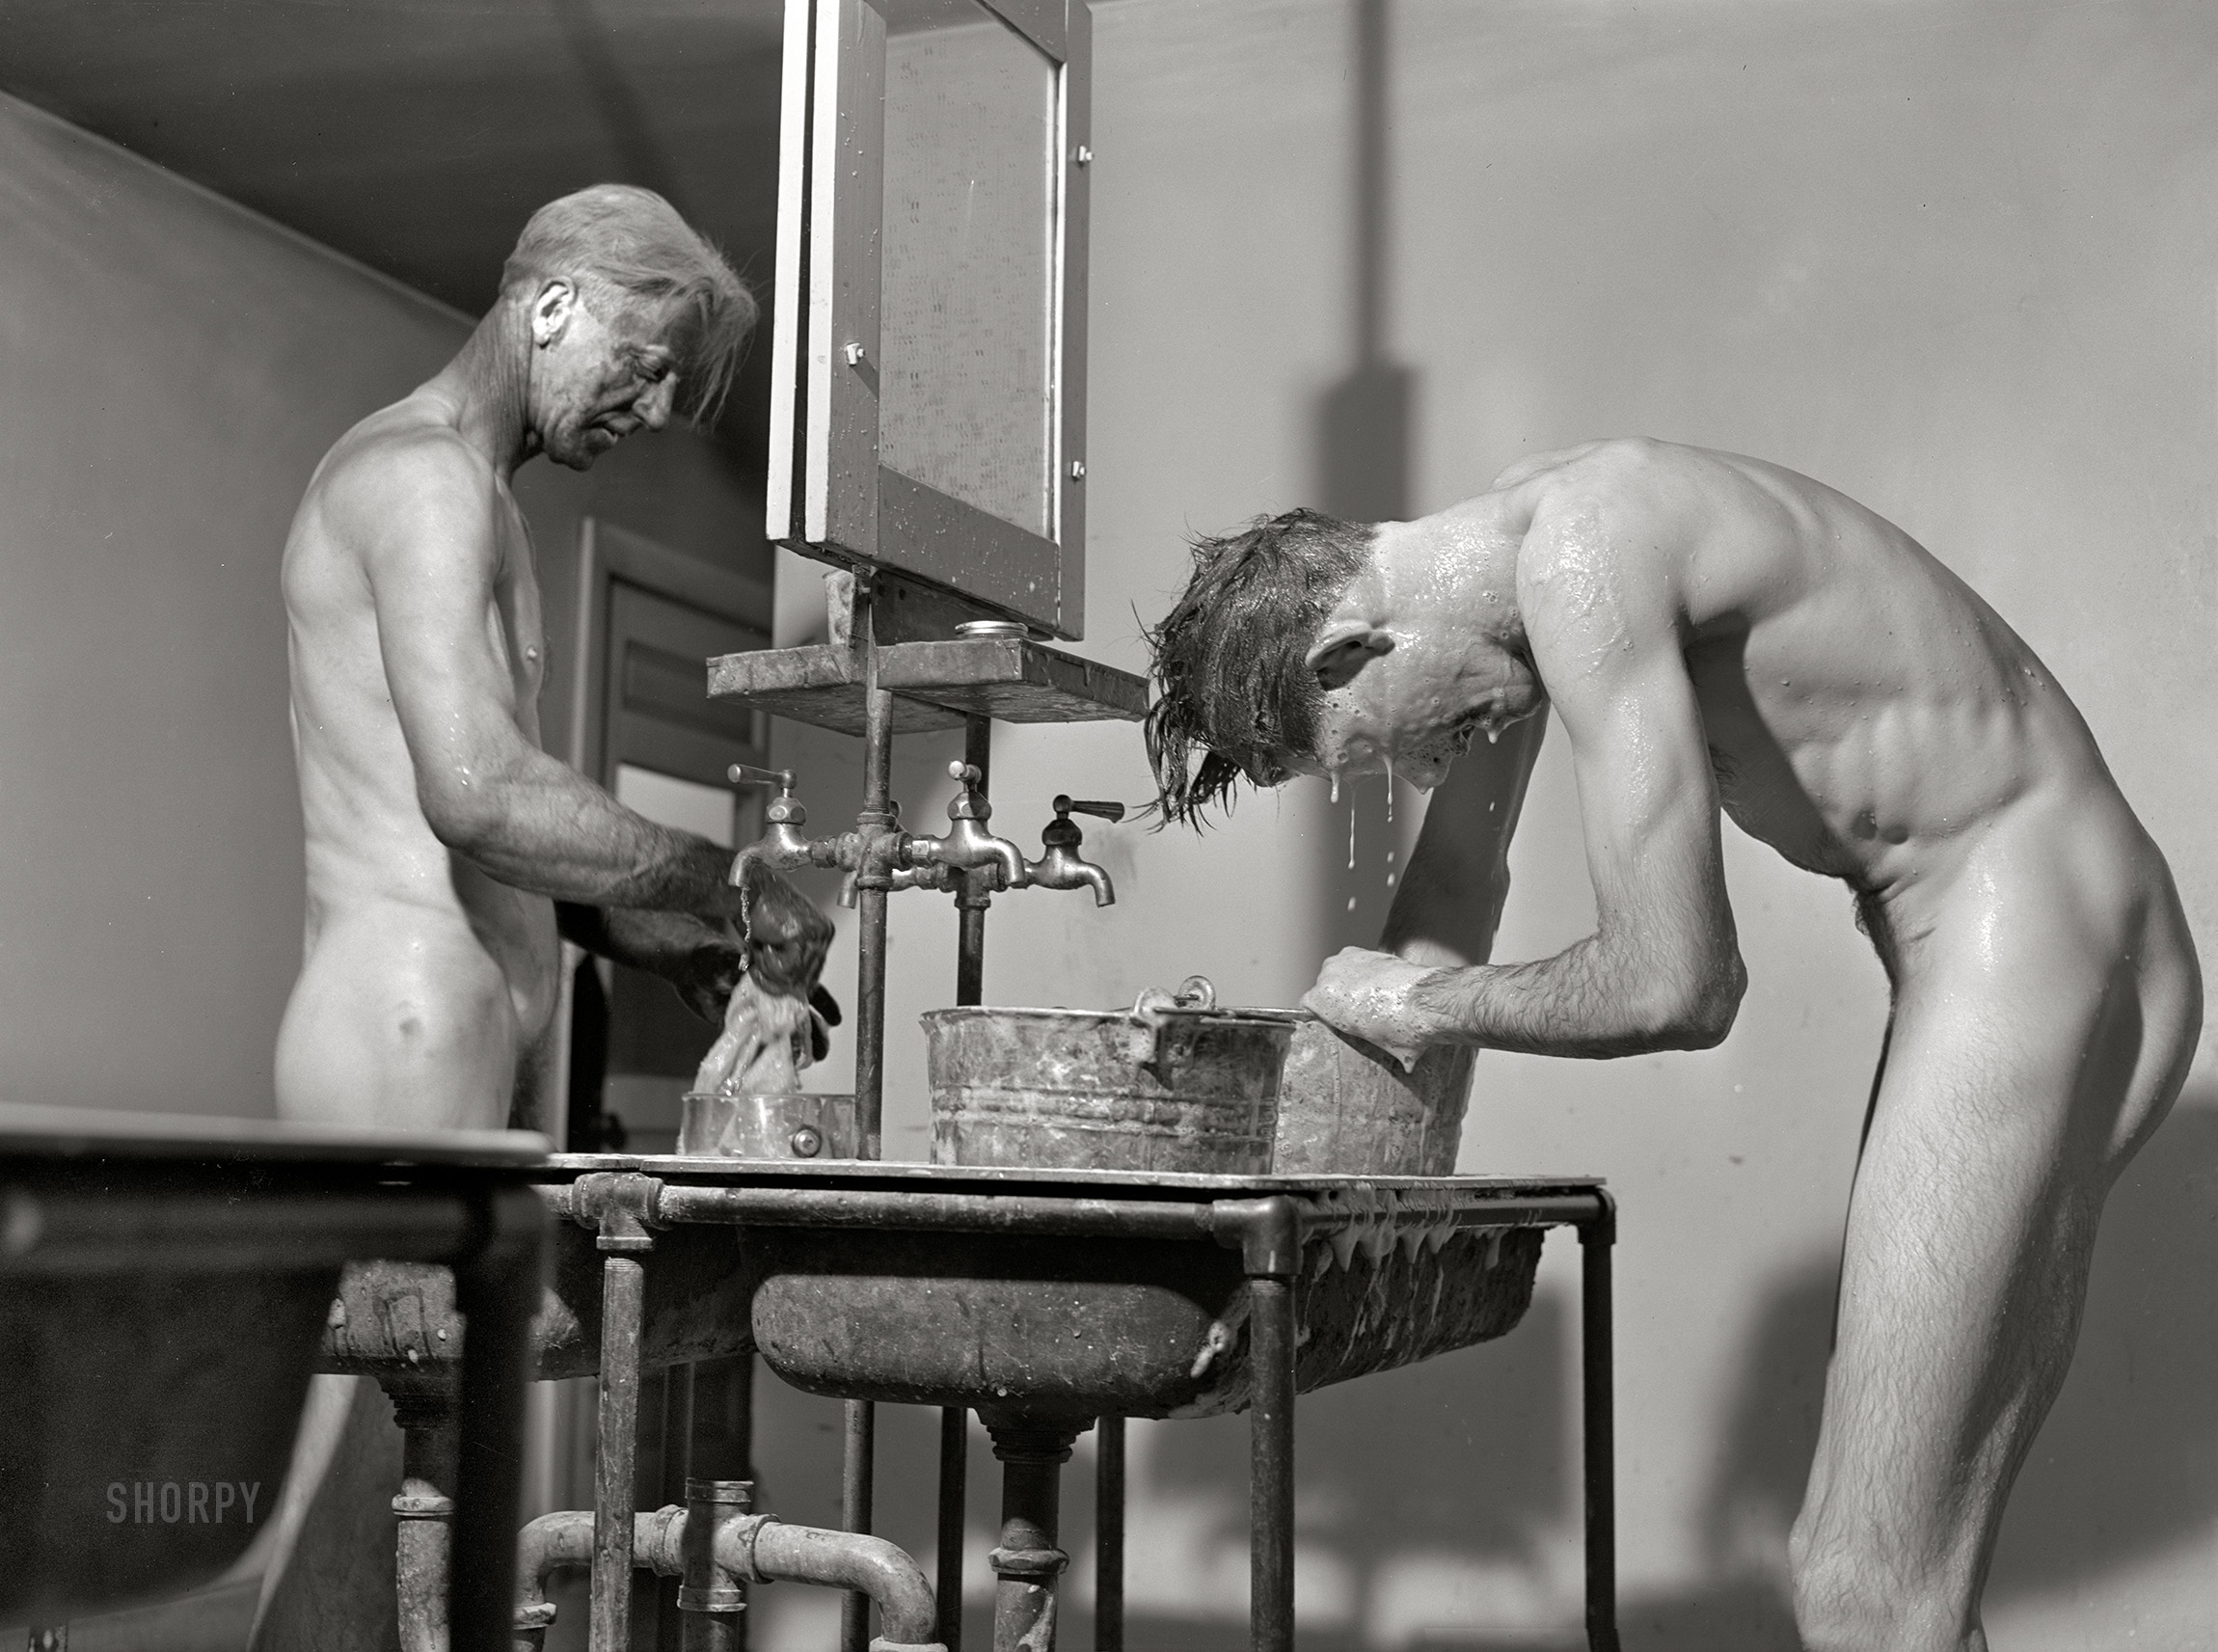 November 1942. "Sunray, Texas. Carbon black plant workers washing up at the end of the day." Acetate negative by John Vachon for the Office of War Information. View full size.